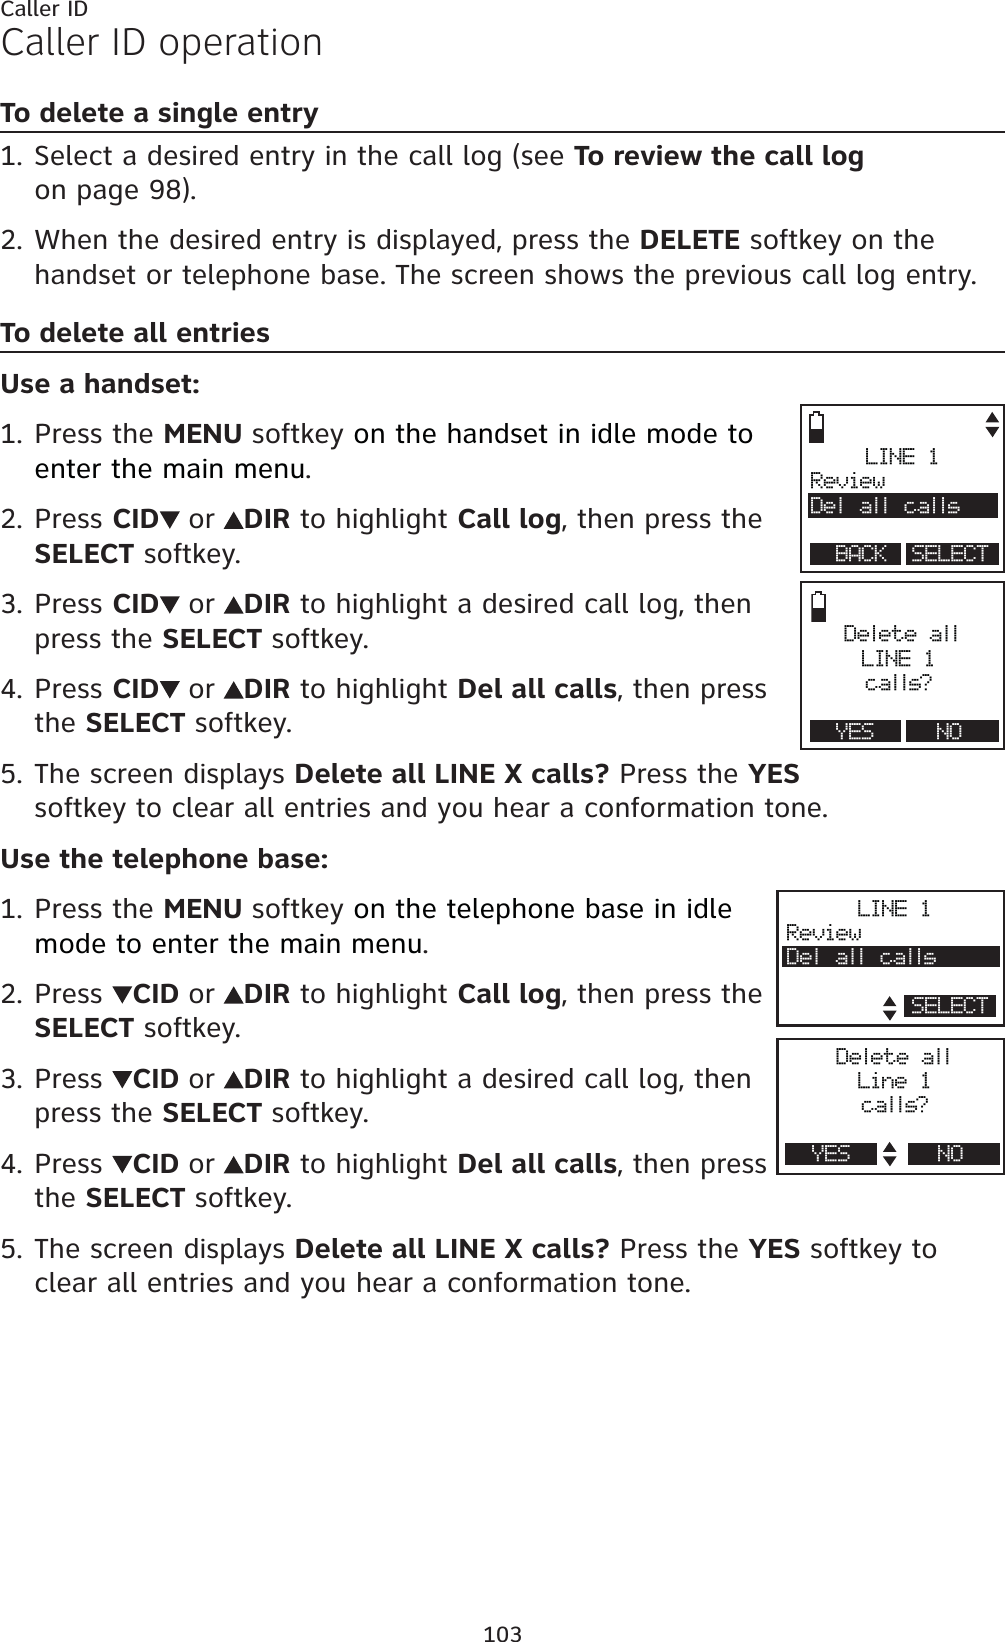 103Caller IDCaller ID operationTo delete a single entrySelect a desired entry in the call log (see To review the call logon page 98).When the desired entry is displayed, press the DELETE softkey on the handset or telephone base. The screen shows the previous call log entry.To delete all entriesUse a handset:Press the MENU softkey on the handset in idle mode to enter the main menu.Press CID or DIR to highlight Call log, then press the SELECT softkey.Press CID or DIR to highlight a desired call log, then press the SELECT softkey.Press CID or DIR to highlight Del all calls, then press the SELECT softkey.The screen displays Delete all LINE X calls? Press the YESsoftkey to clear all entries and you hear a conformation tone.Use the telephone base:Press the MENU softkey on the telephone base in idle mode to enter the main menu.Press CID or DIR to highlight Call log, then press the SELECT softkey.Press CID or DIR to highlight a desired call log, then press the SELECT softkey.Press CID or DIR to highlight Del all calls, then press the SELECT softkey.The screen displays Delete all LINE X calls? Press the YES softkey to clear all entries and you hear a conformation tone.1.2.1.2.3.4.5.1.2.3.4.5.LINE 1ReviewD el all c allsBACK SELECTDelete allLINE 1calls?YES NOLINE 1ReviewD el all c allsSELECTDelete allLine 1calls?YES NO